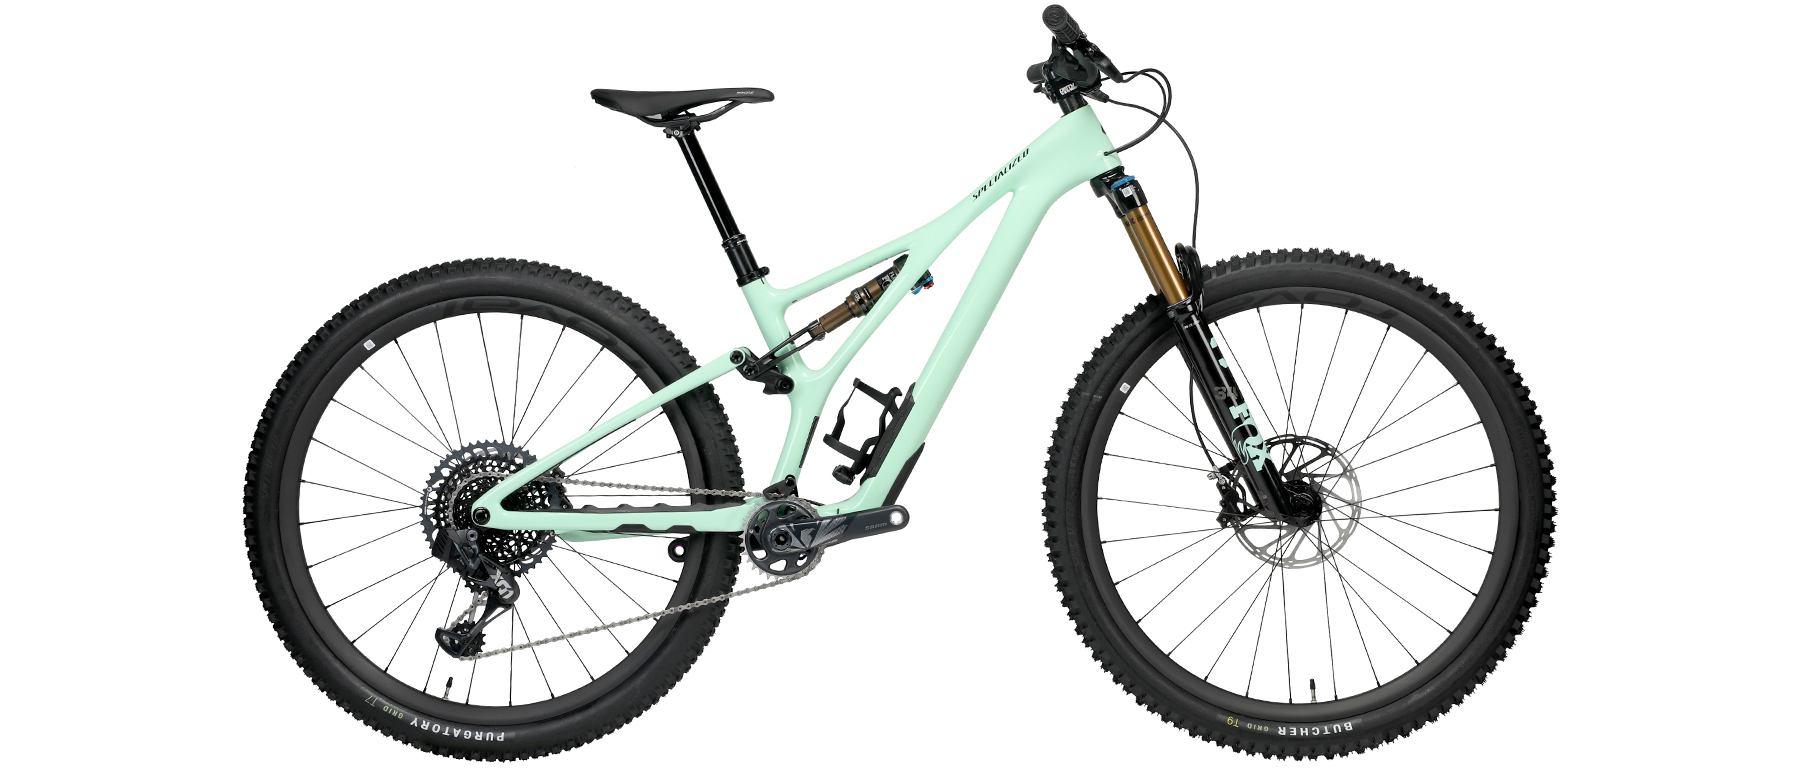 Specialized Stumpjumper Pro Bicycle 2022